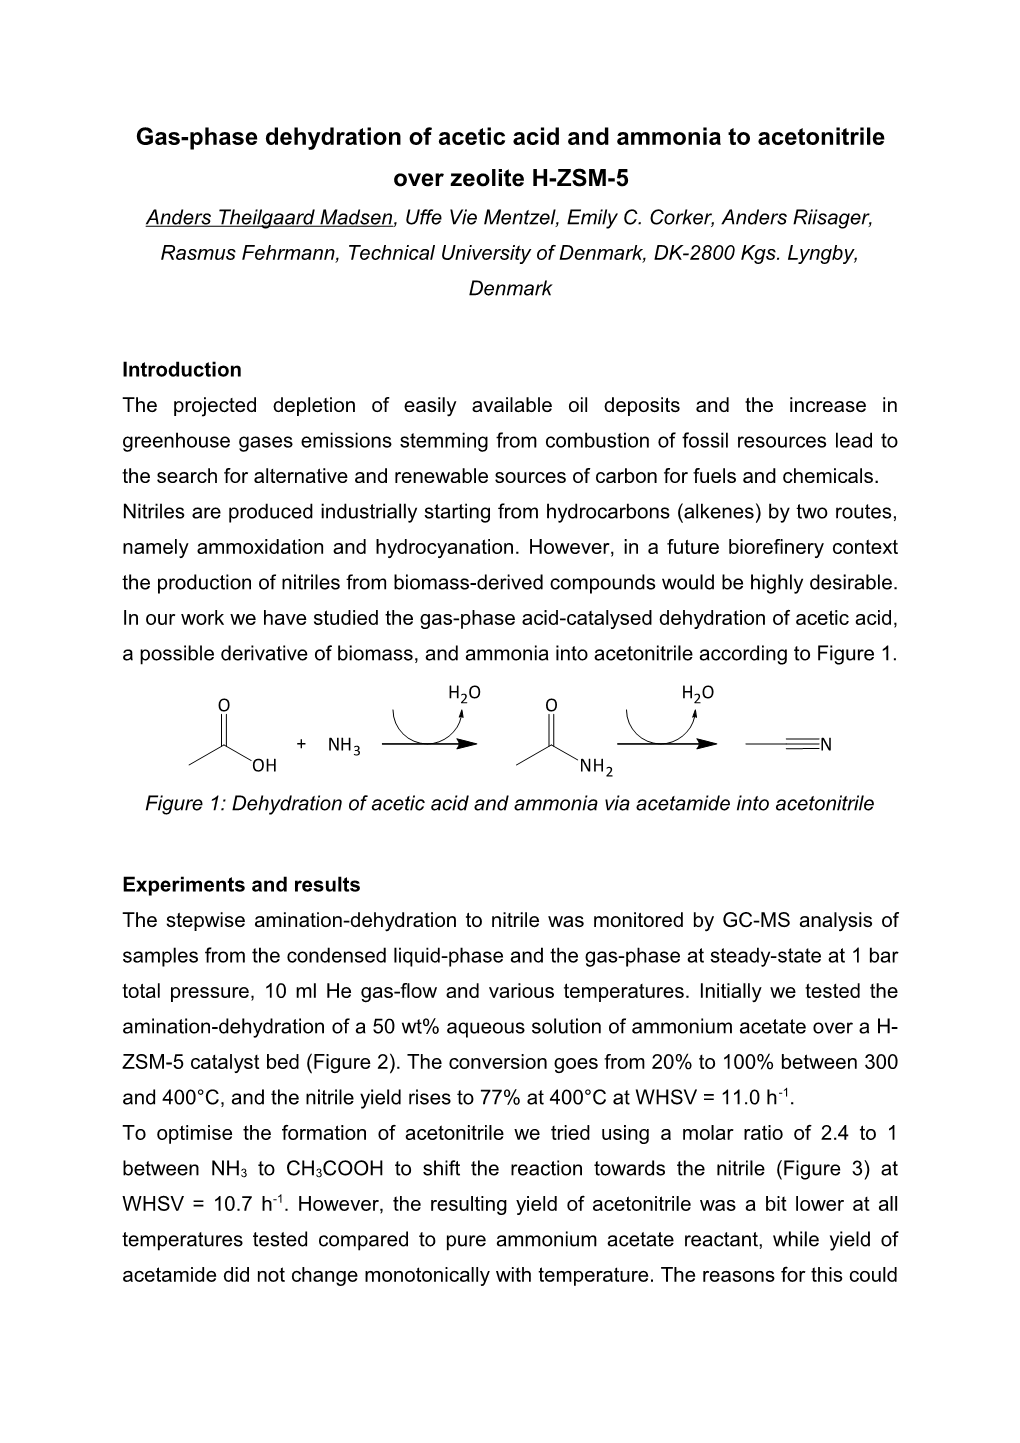 Gas-Phase Dehydration of Acetic Acid and Ammonia to Acetonitrile Over Zeolite H-ZSM-5